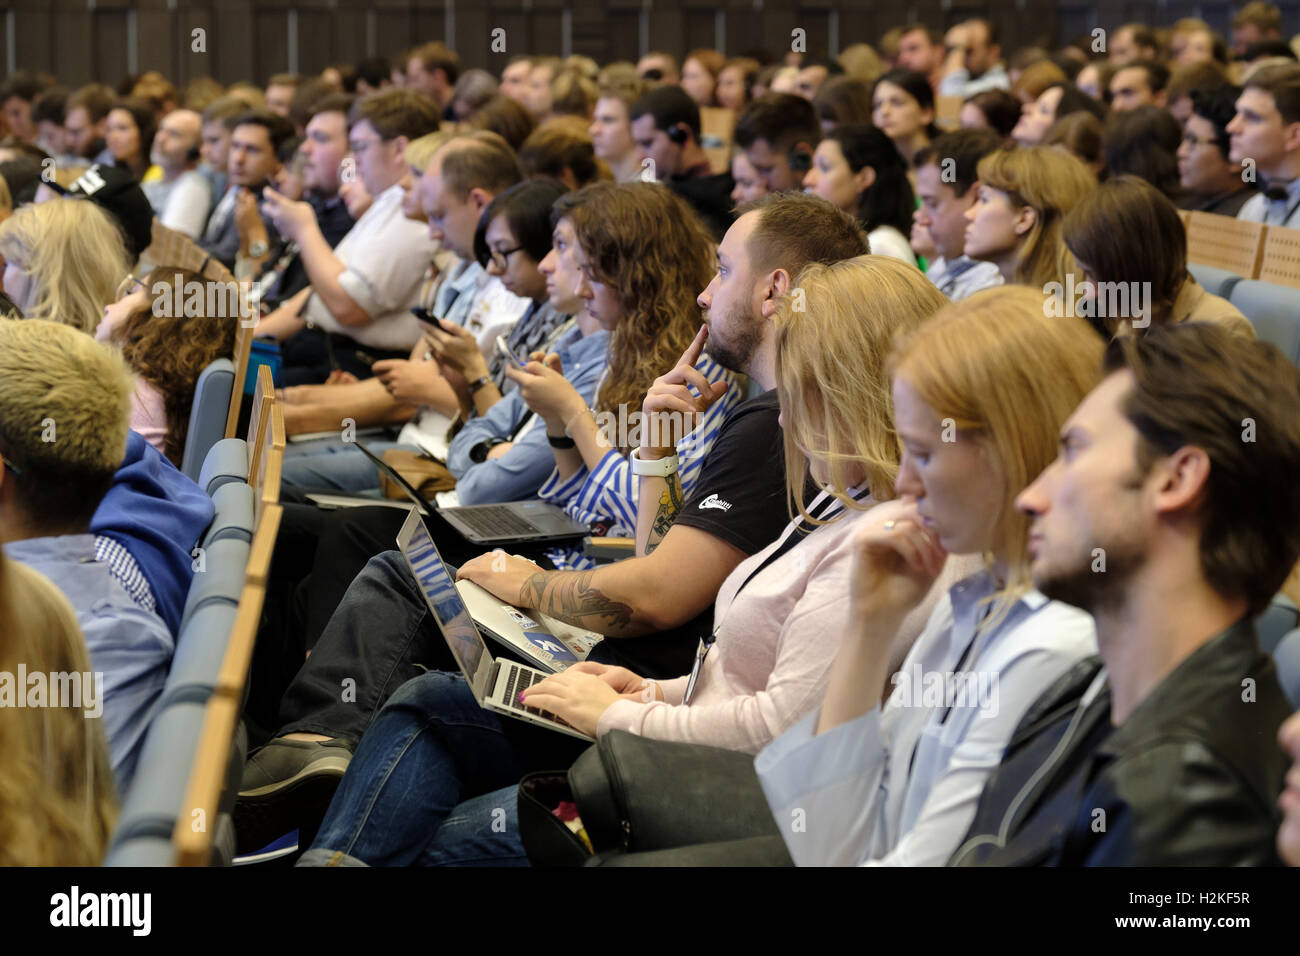 People attend business conference Stock Photo